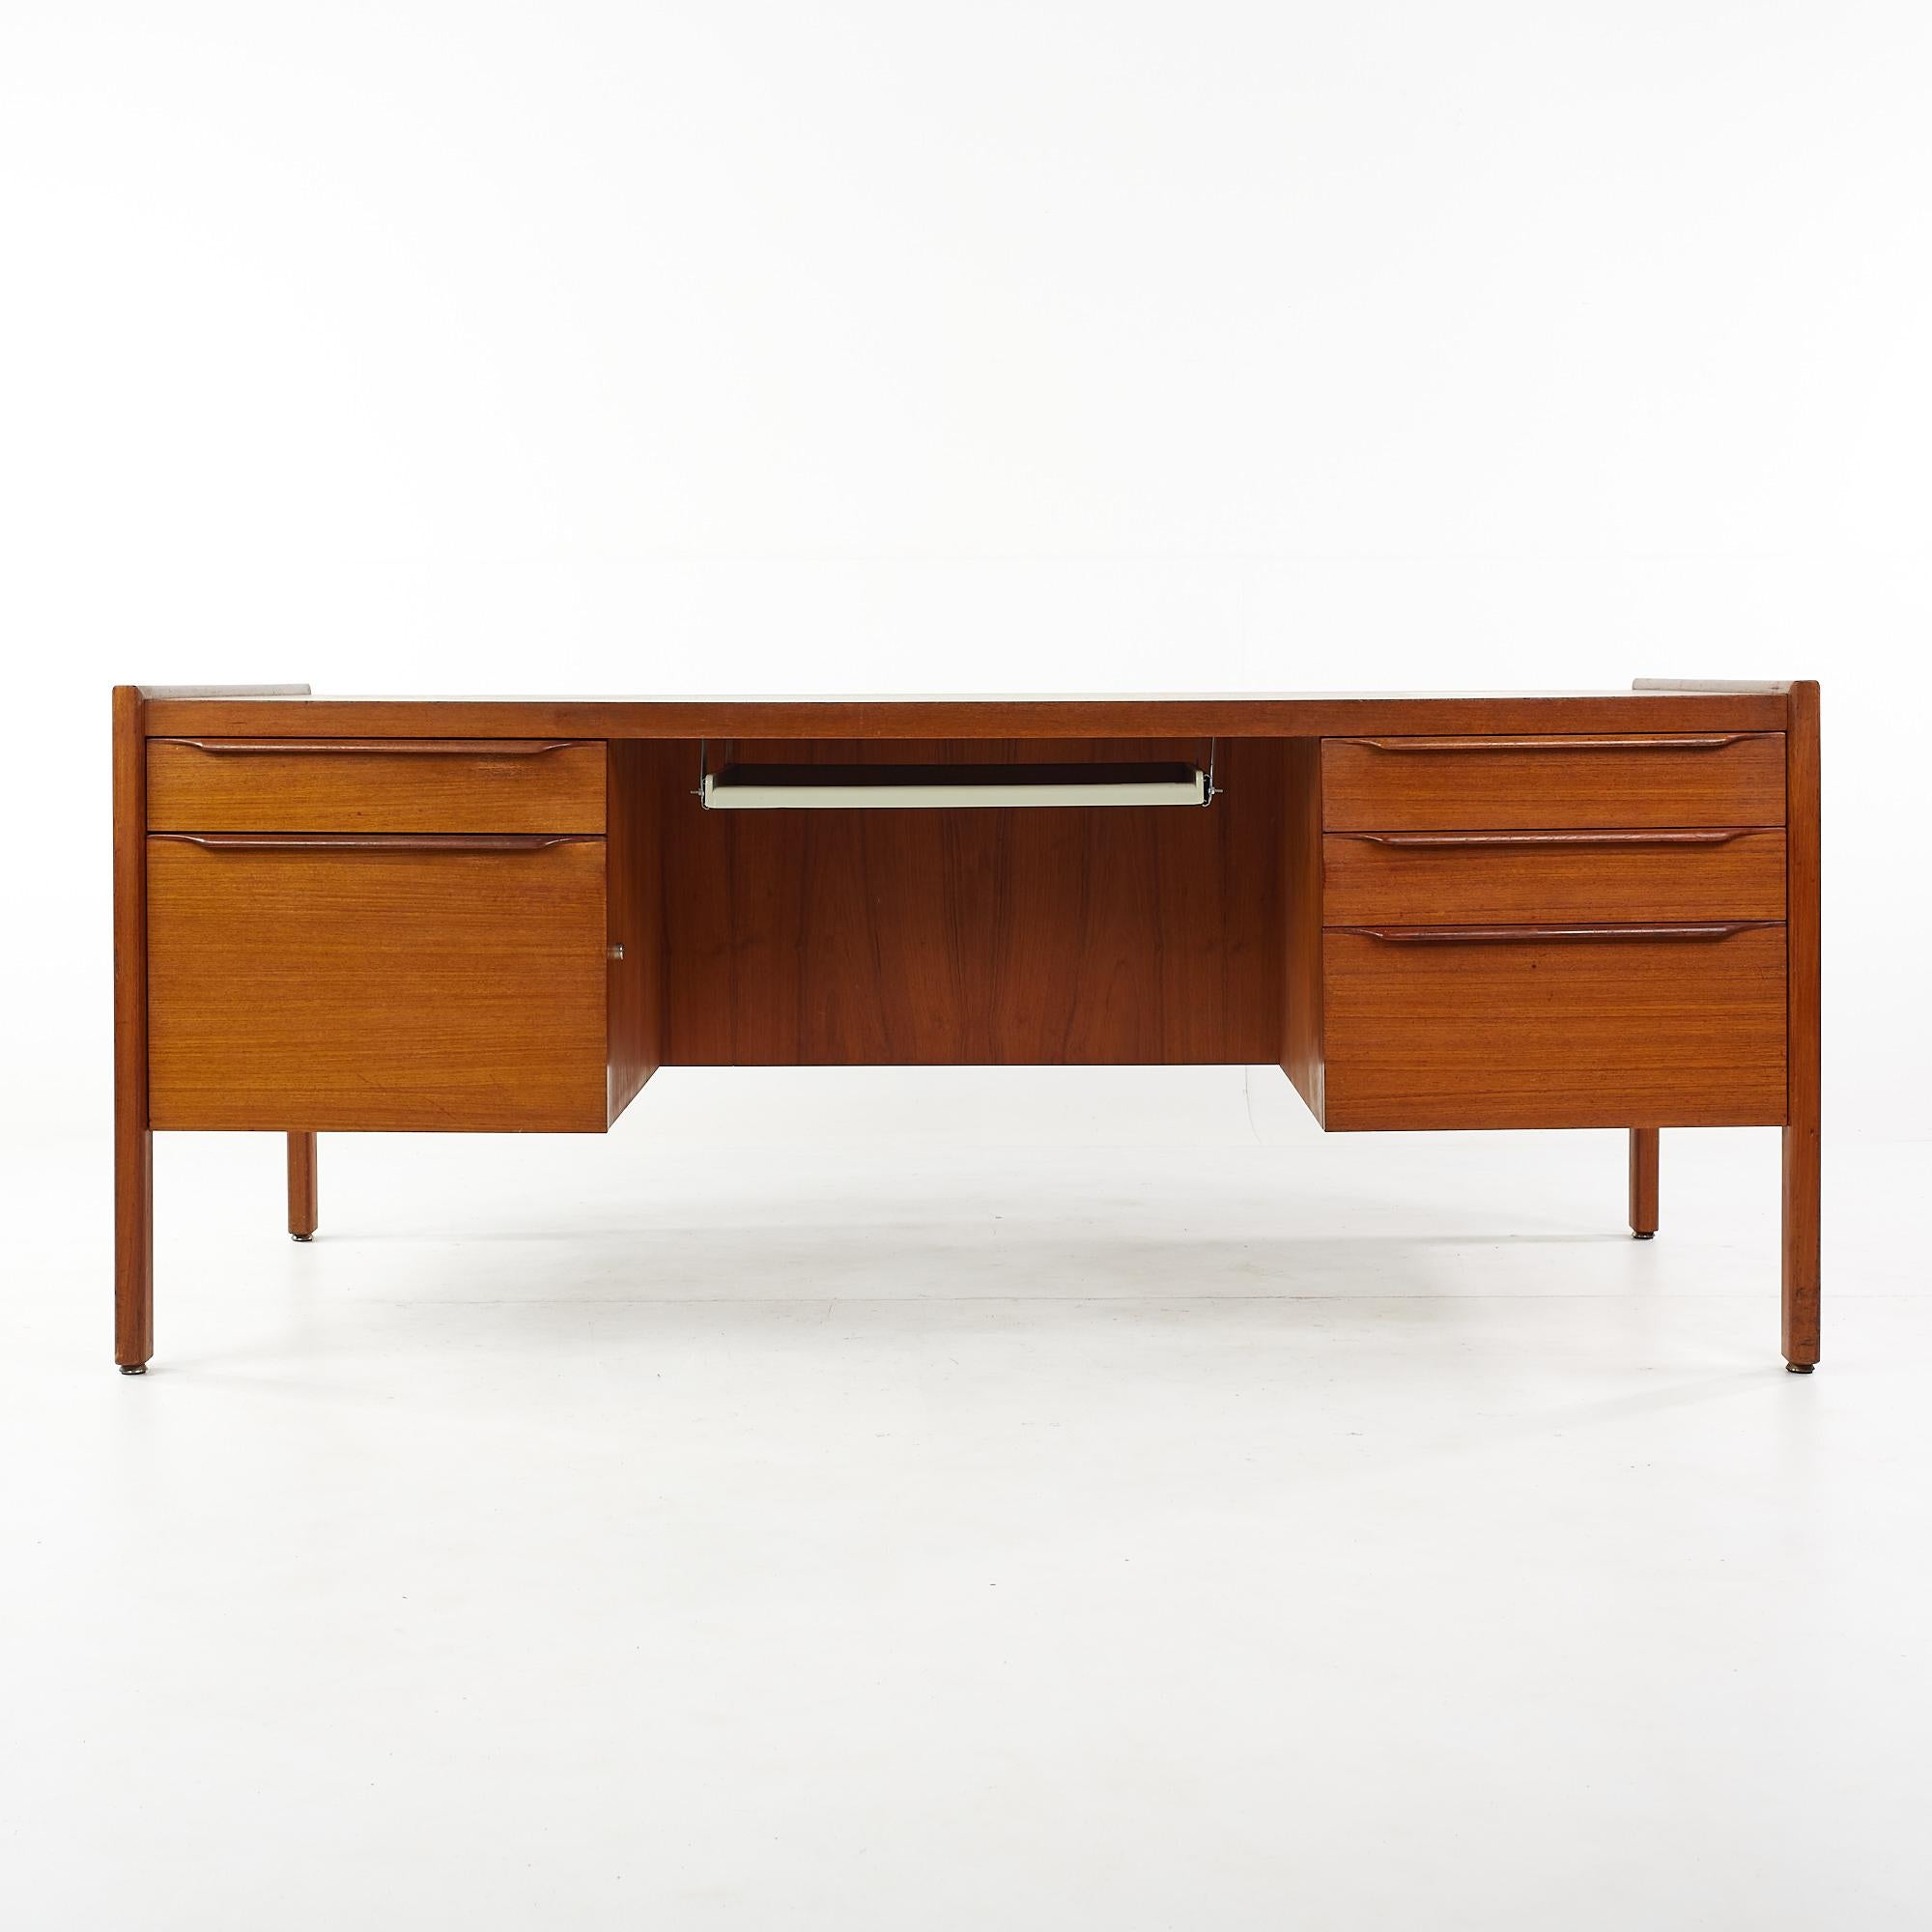 Arne Vodder style mid century teak executive desk

This desk measures: 72 wide x 37 deep x 29.5 high, with a chair clearance of 27 inches

All pieces of furniture can be had in what we call restored vintage condition. That means the piece is